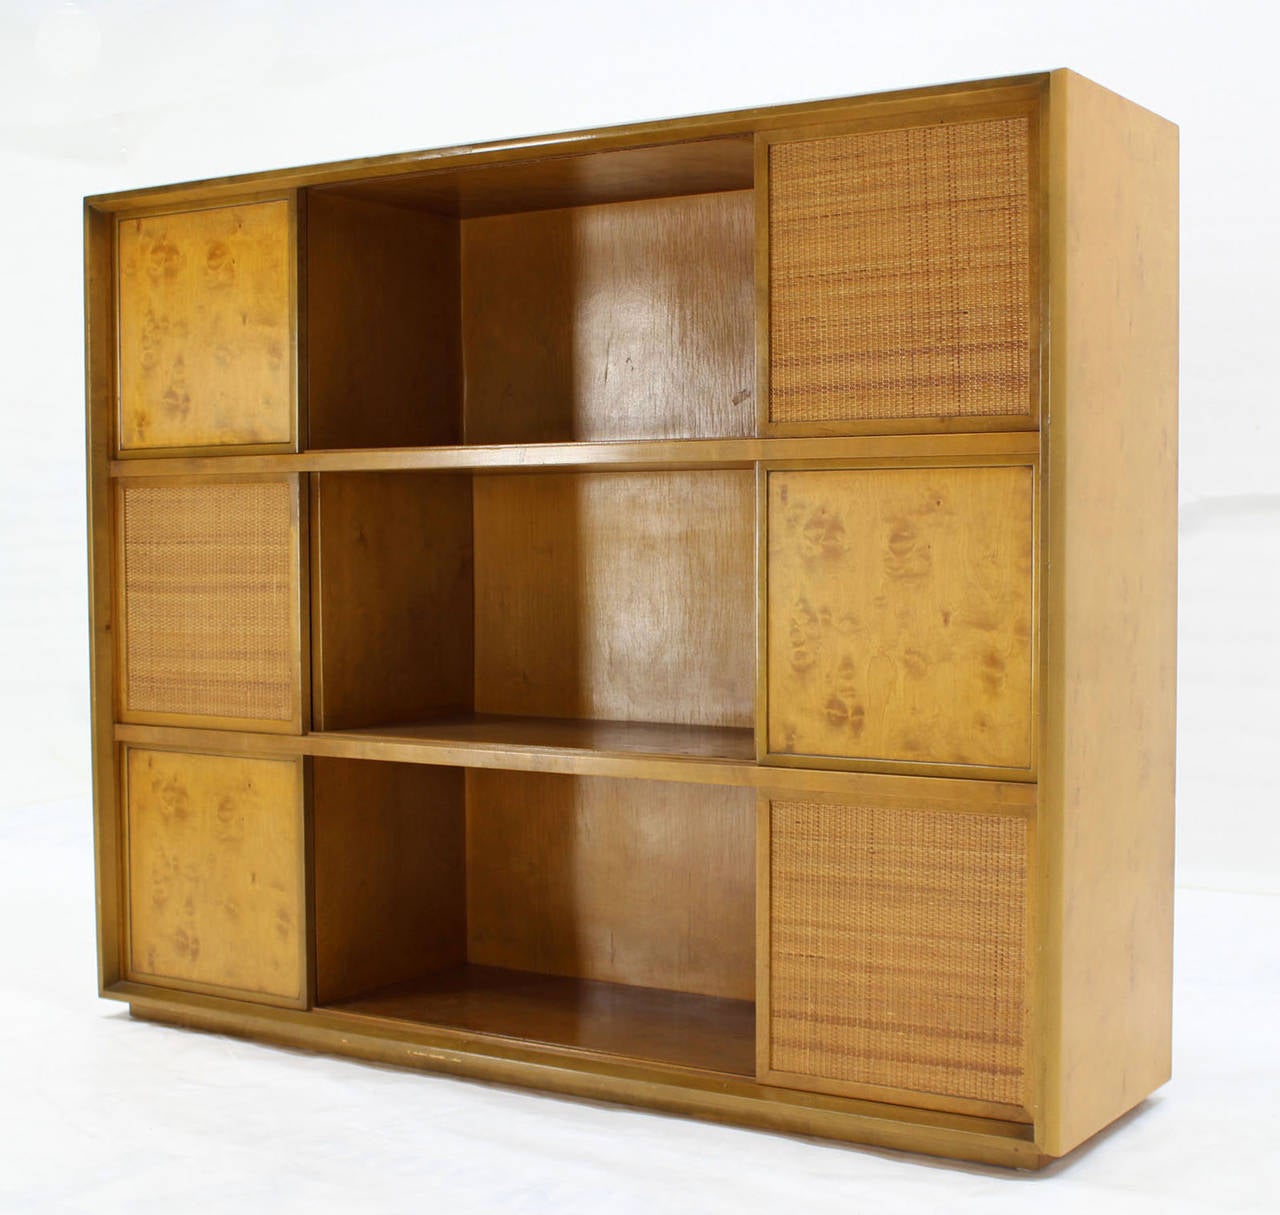 Very nice Swedish modern bookcase with multiple sliding doors by Edmund Spence. Blond birch wood with some burl elements and caned doors.